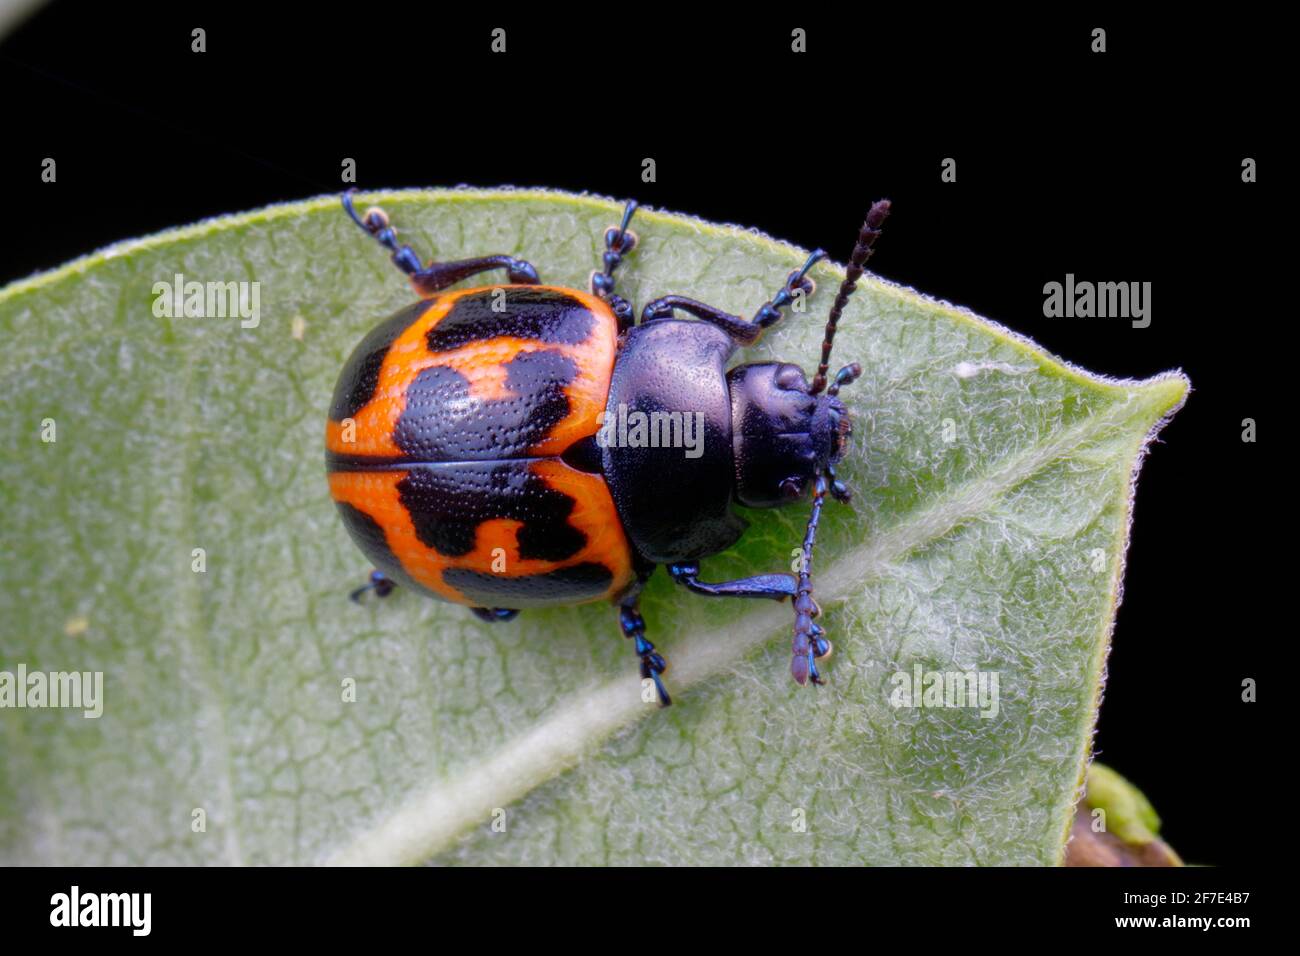 A swamp milkweed beetle is crawling on a leaf. Stock Photo